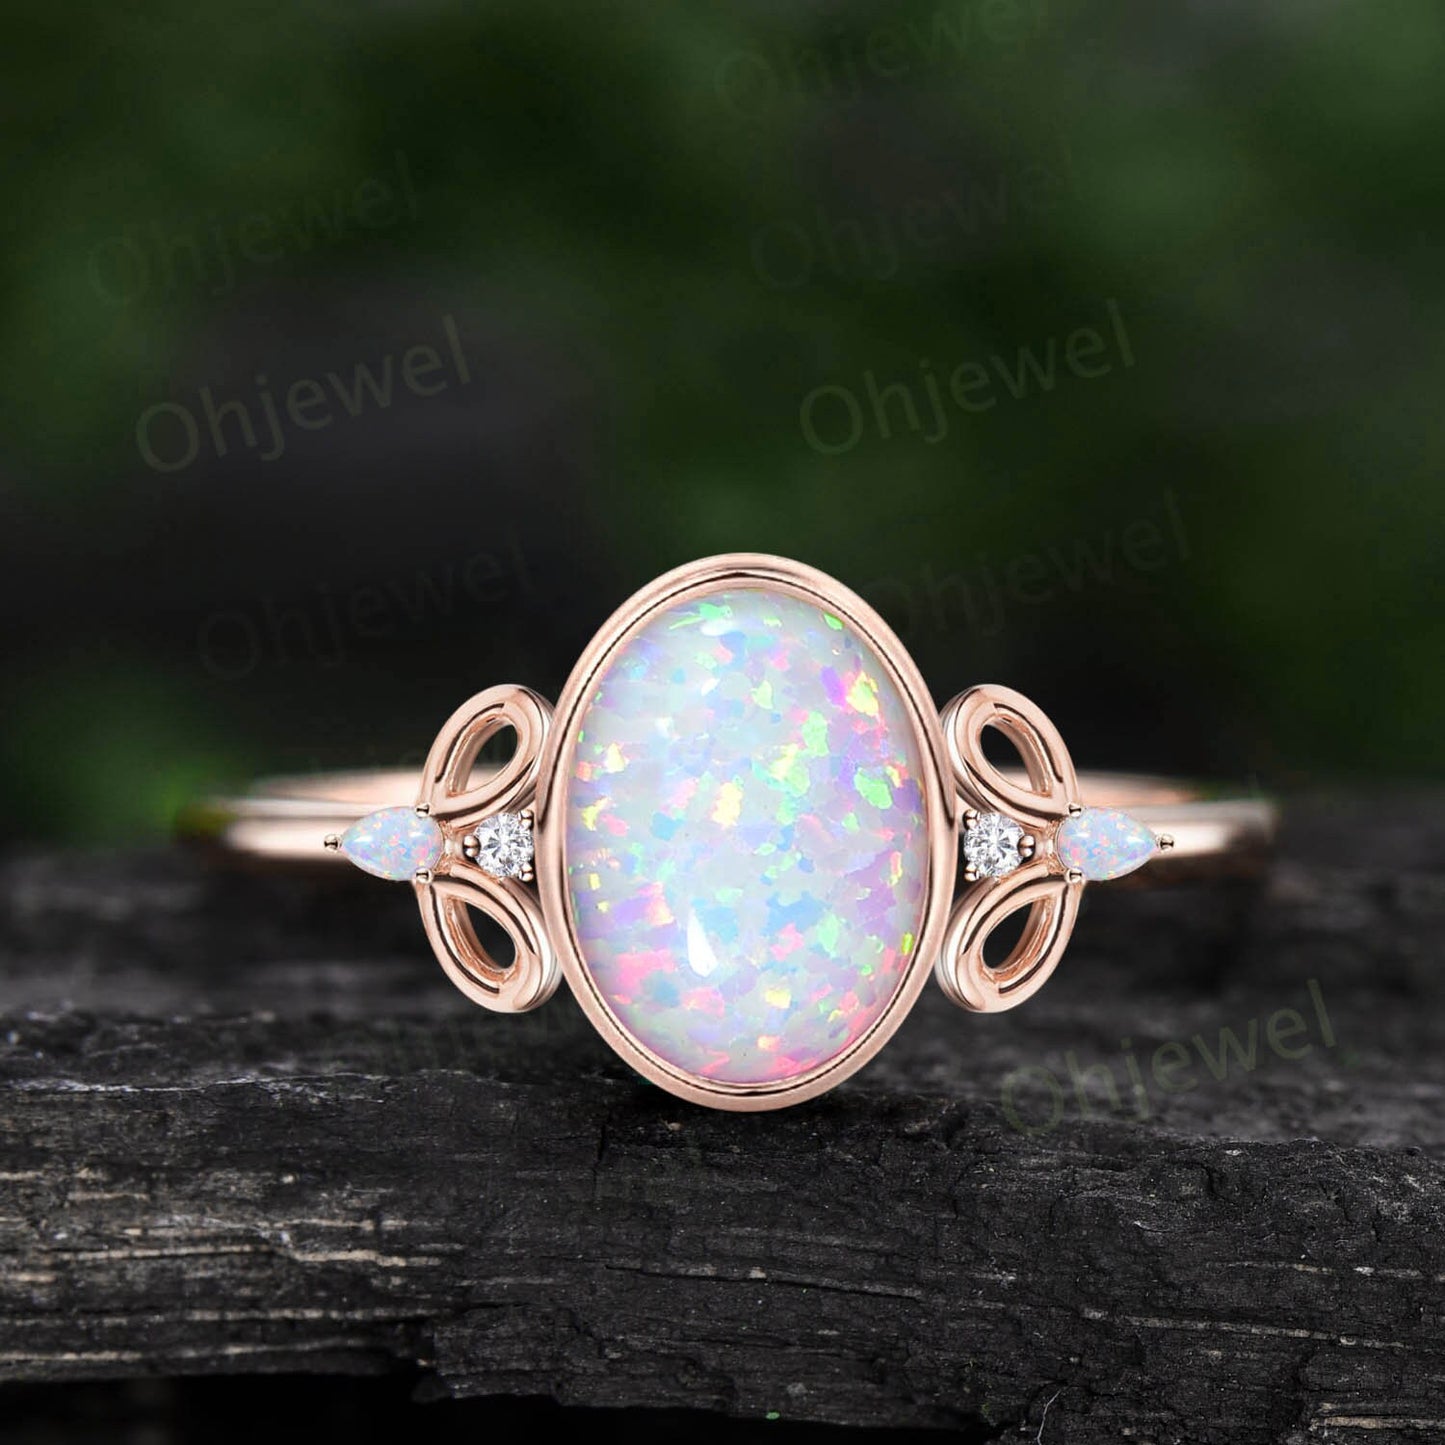 Oval white opal ring vintage rose gold bezel unique engagement ring art deco five stone bridal wedding anniversary ring gift for women